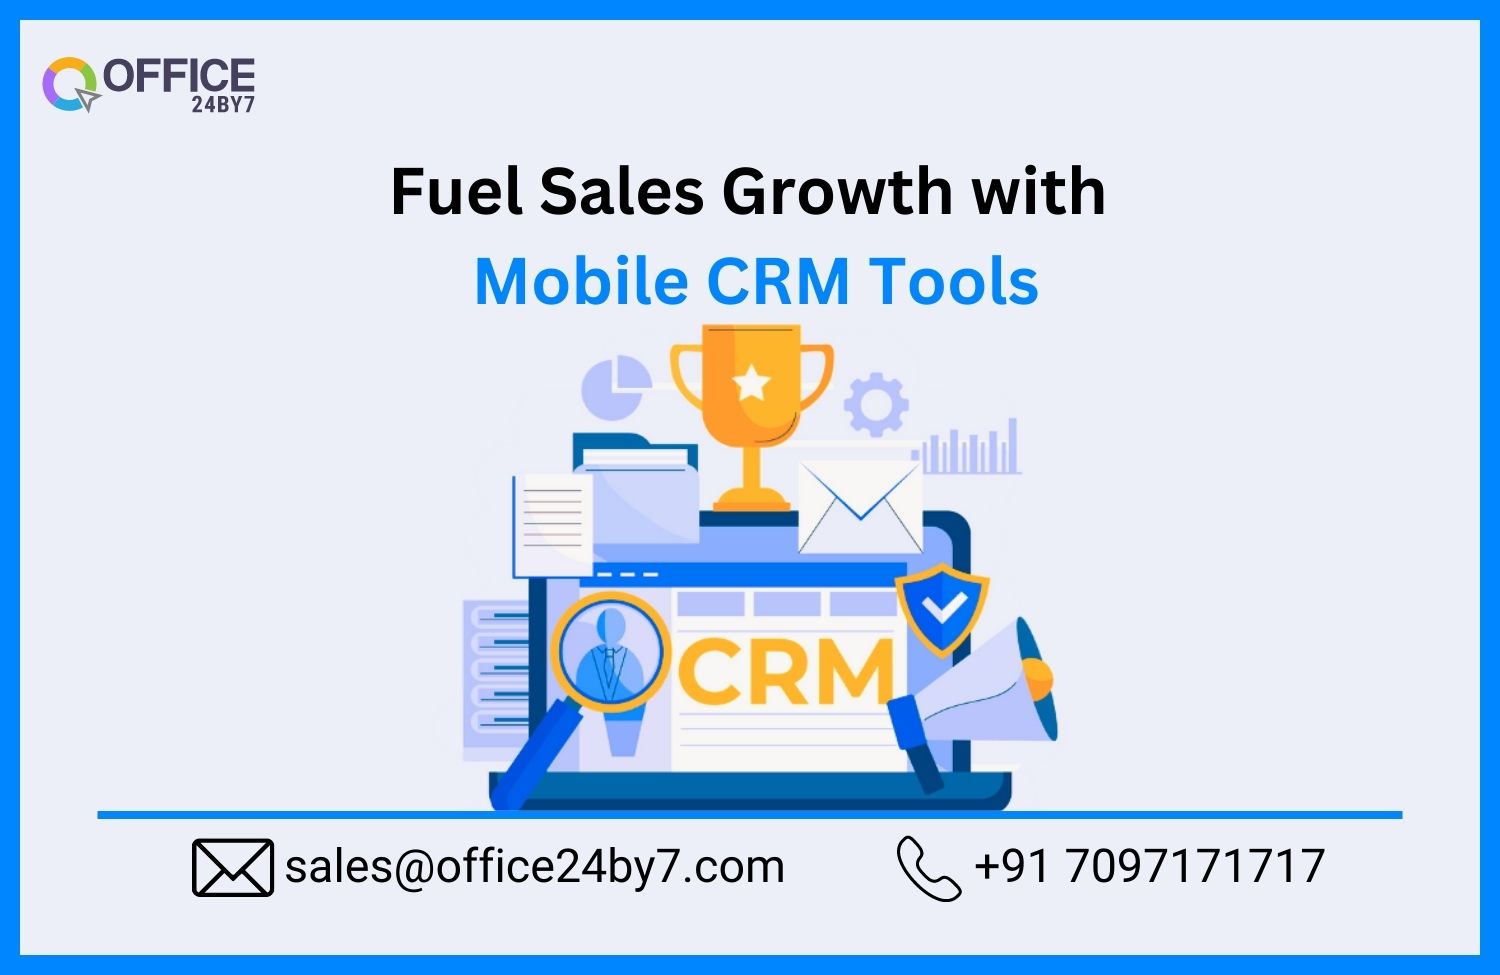 Fuel Sales Growth with Mobile CRM Tools